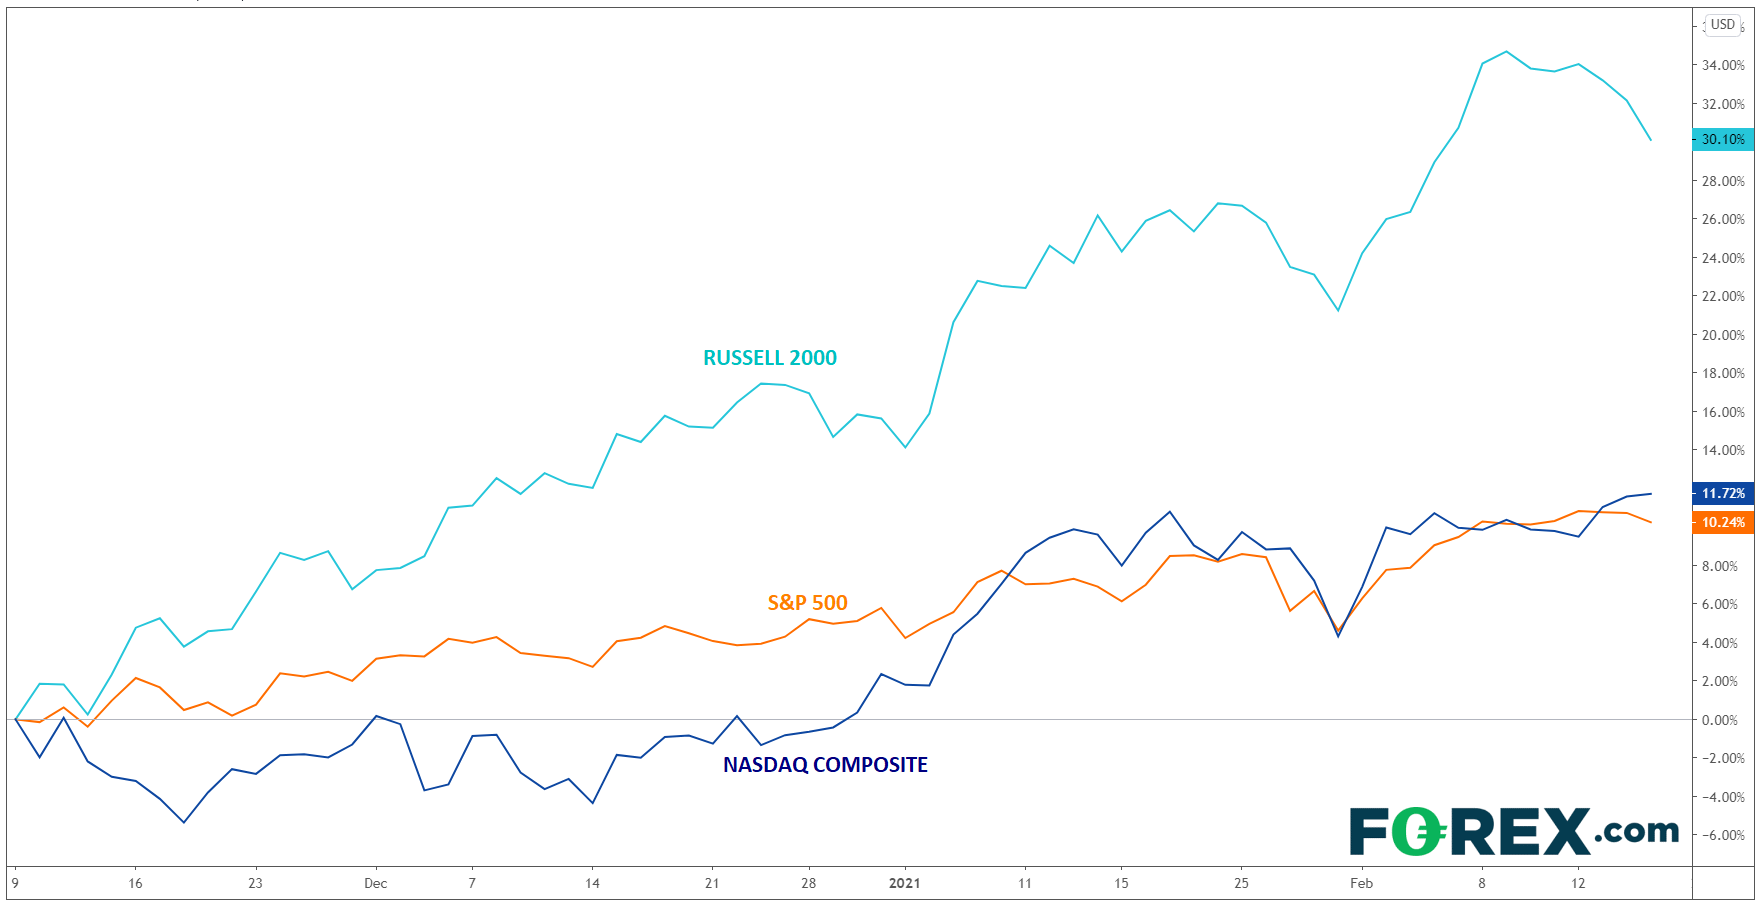 Chart analysis comparing performance of Russell 2000, S&P 500 and NASDAQ composite. Published in February 2021 by FOREX.com